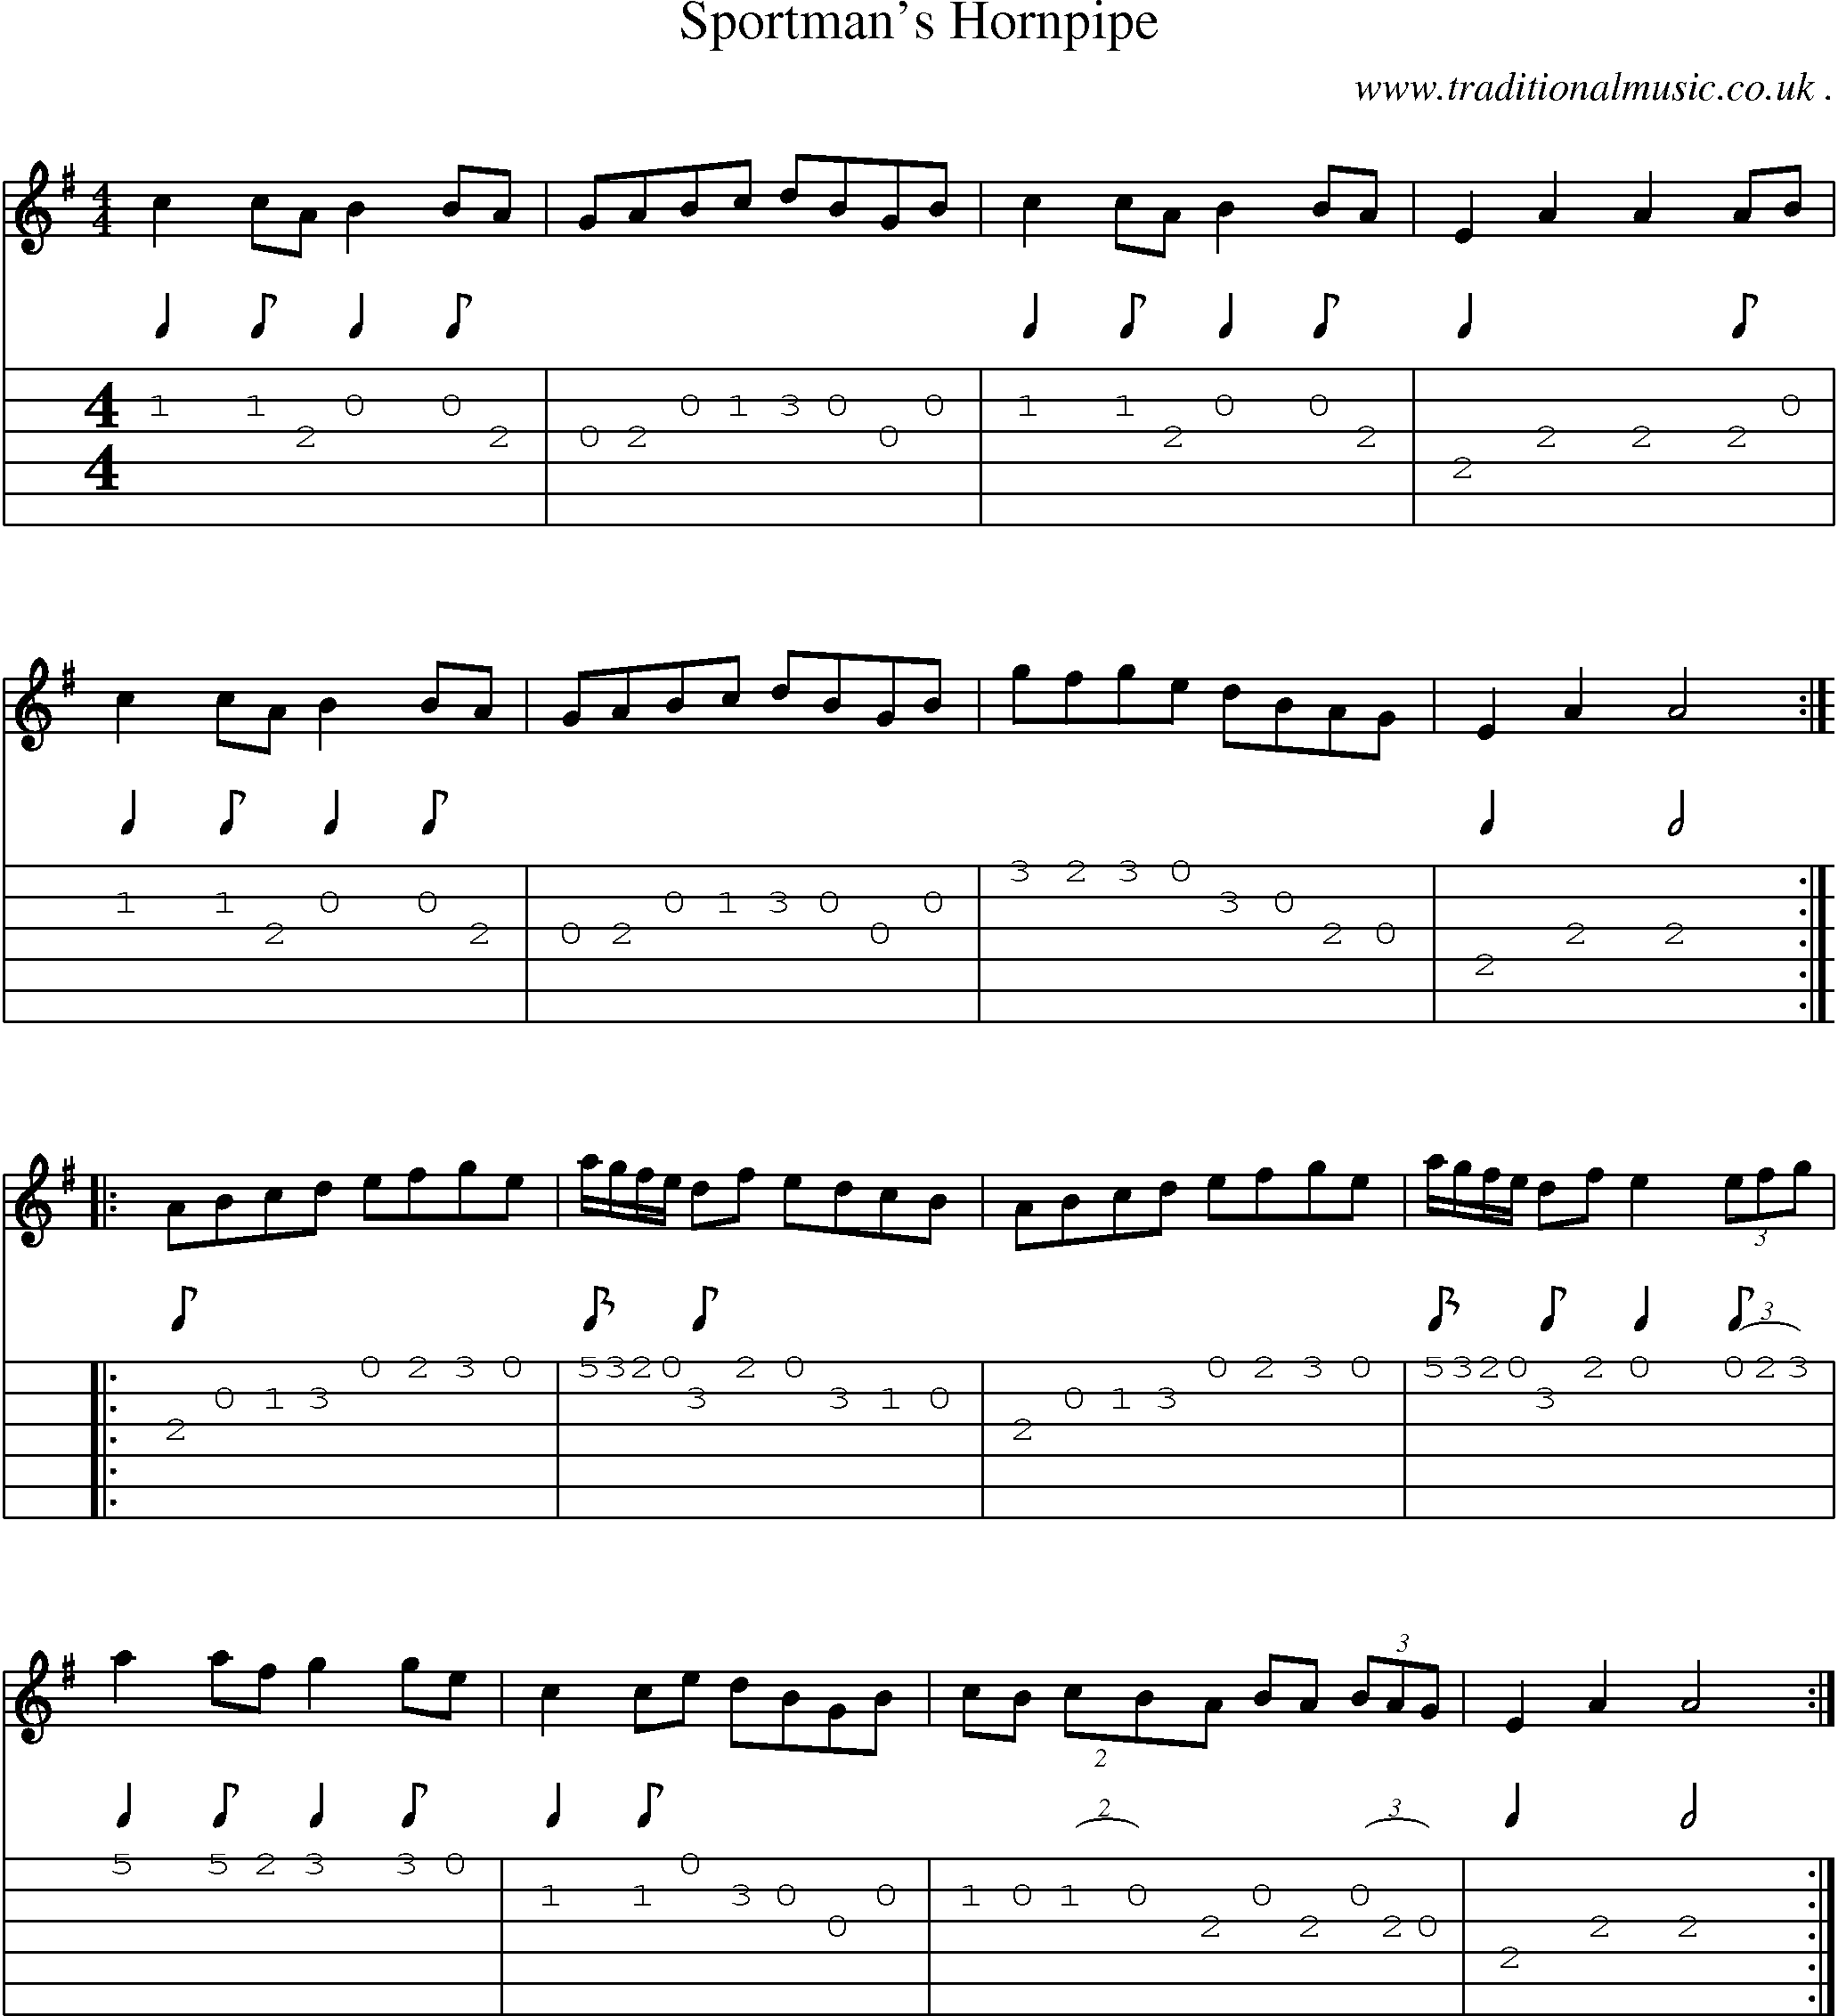 Sheet-Music and Guitar Tabs for Sportmans Hornpipe